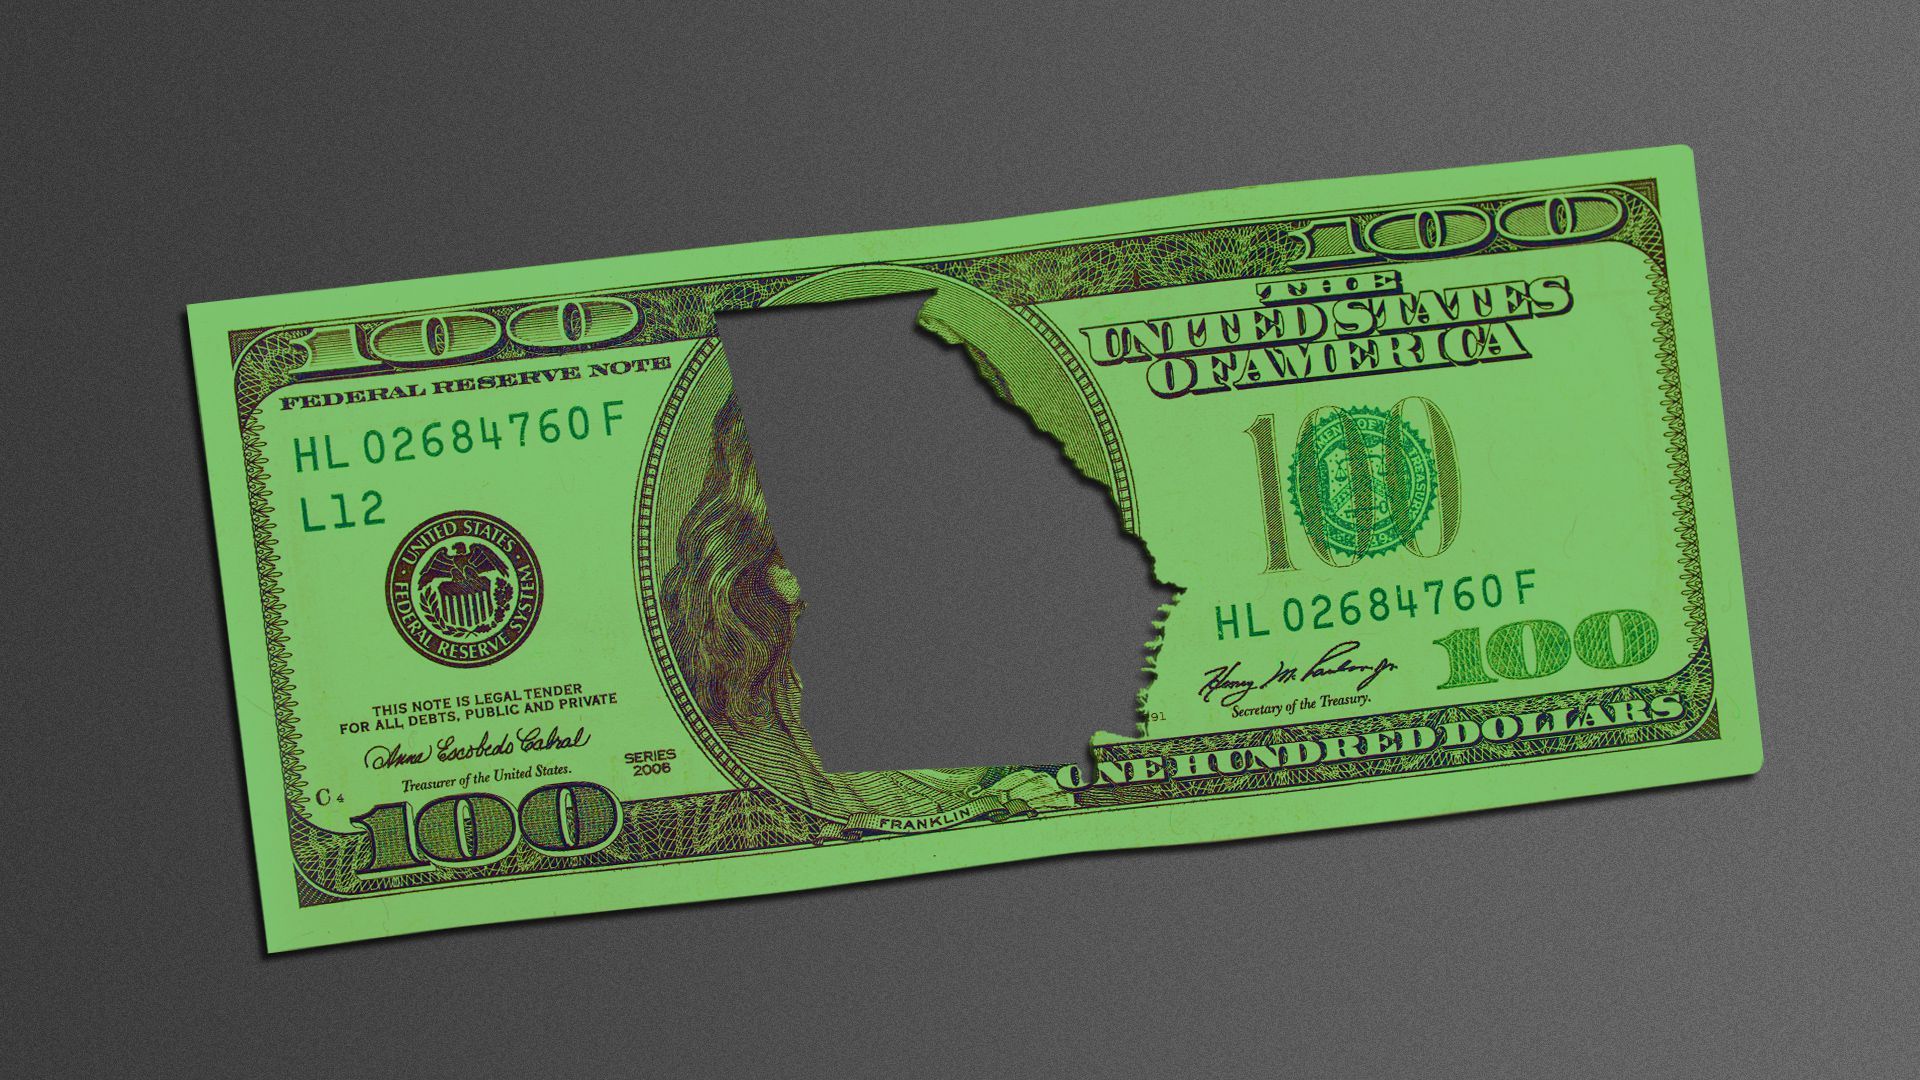 Illustration of a hundred dollar bill with a Georgia-shaped hole punched out of the center